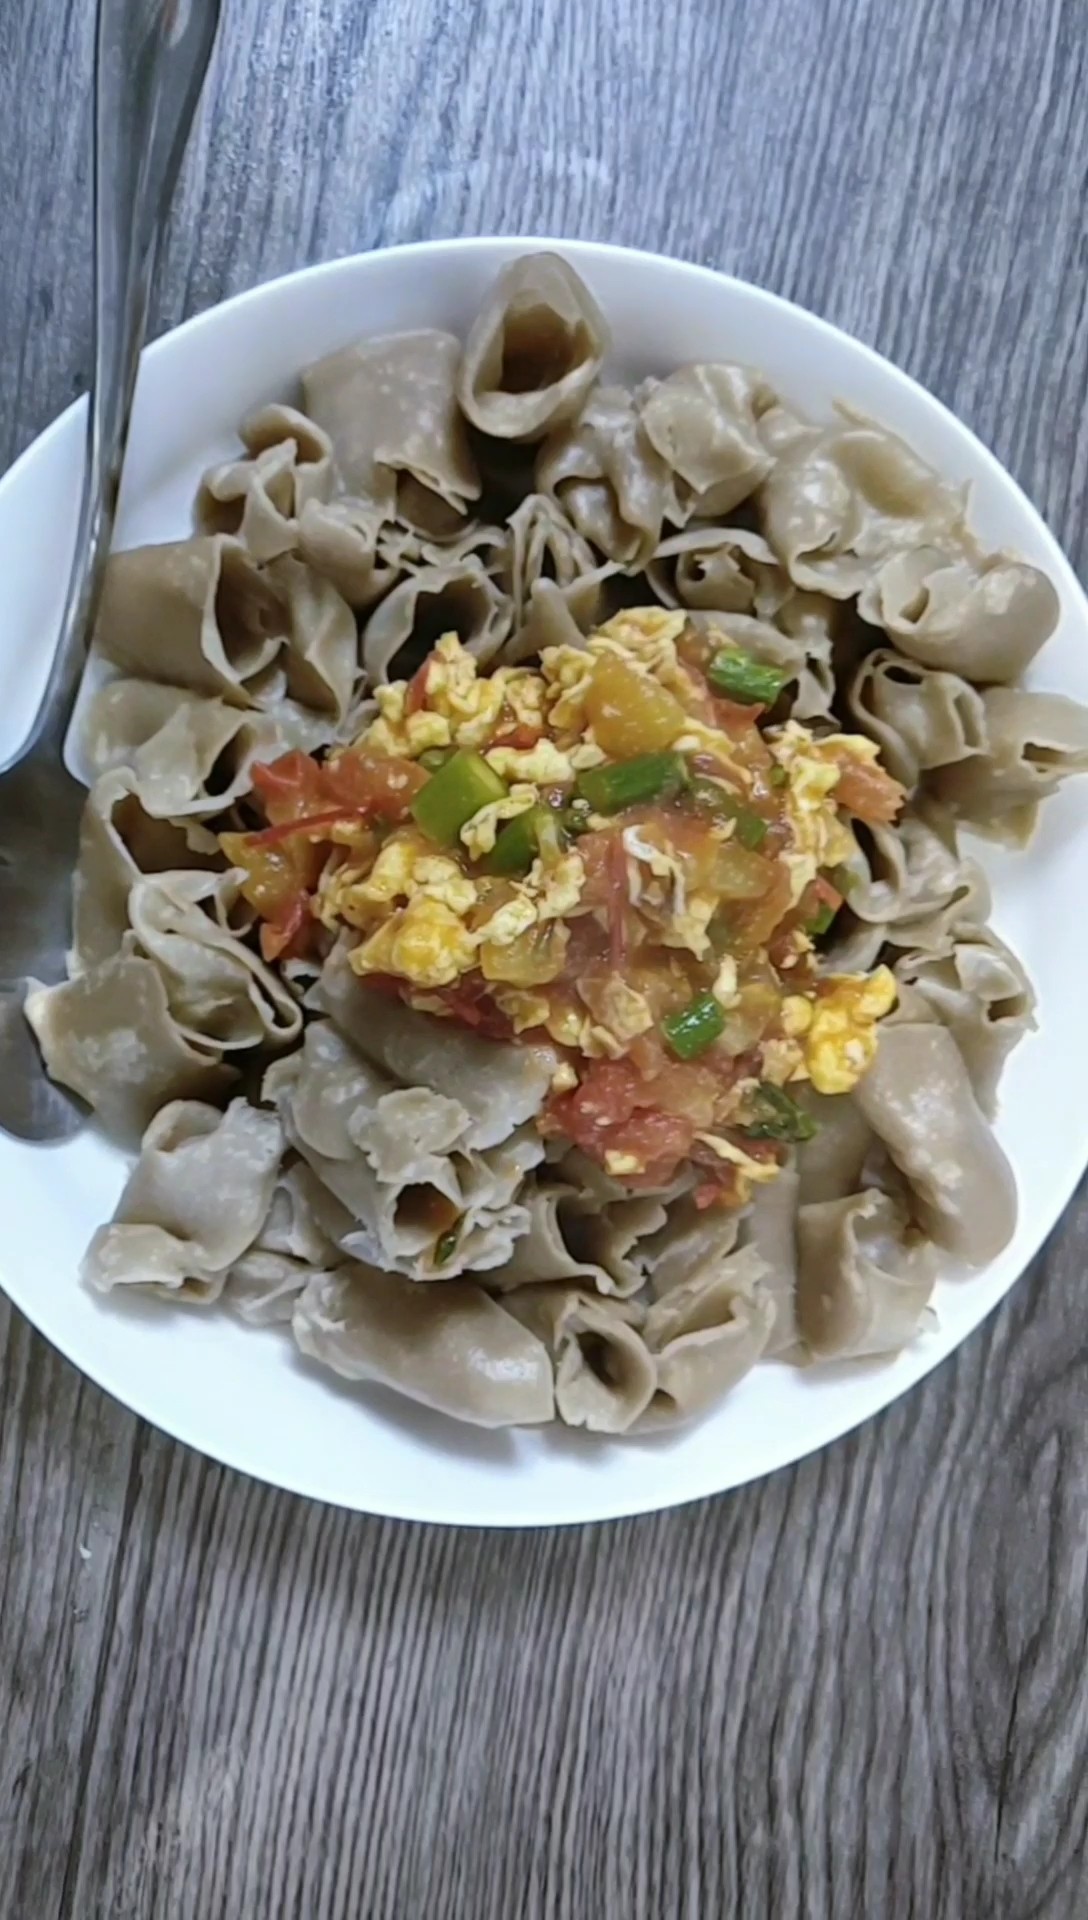 Shanxi Noodles and Castanopsis